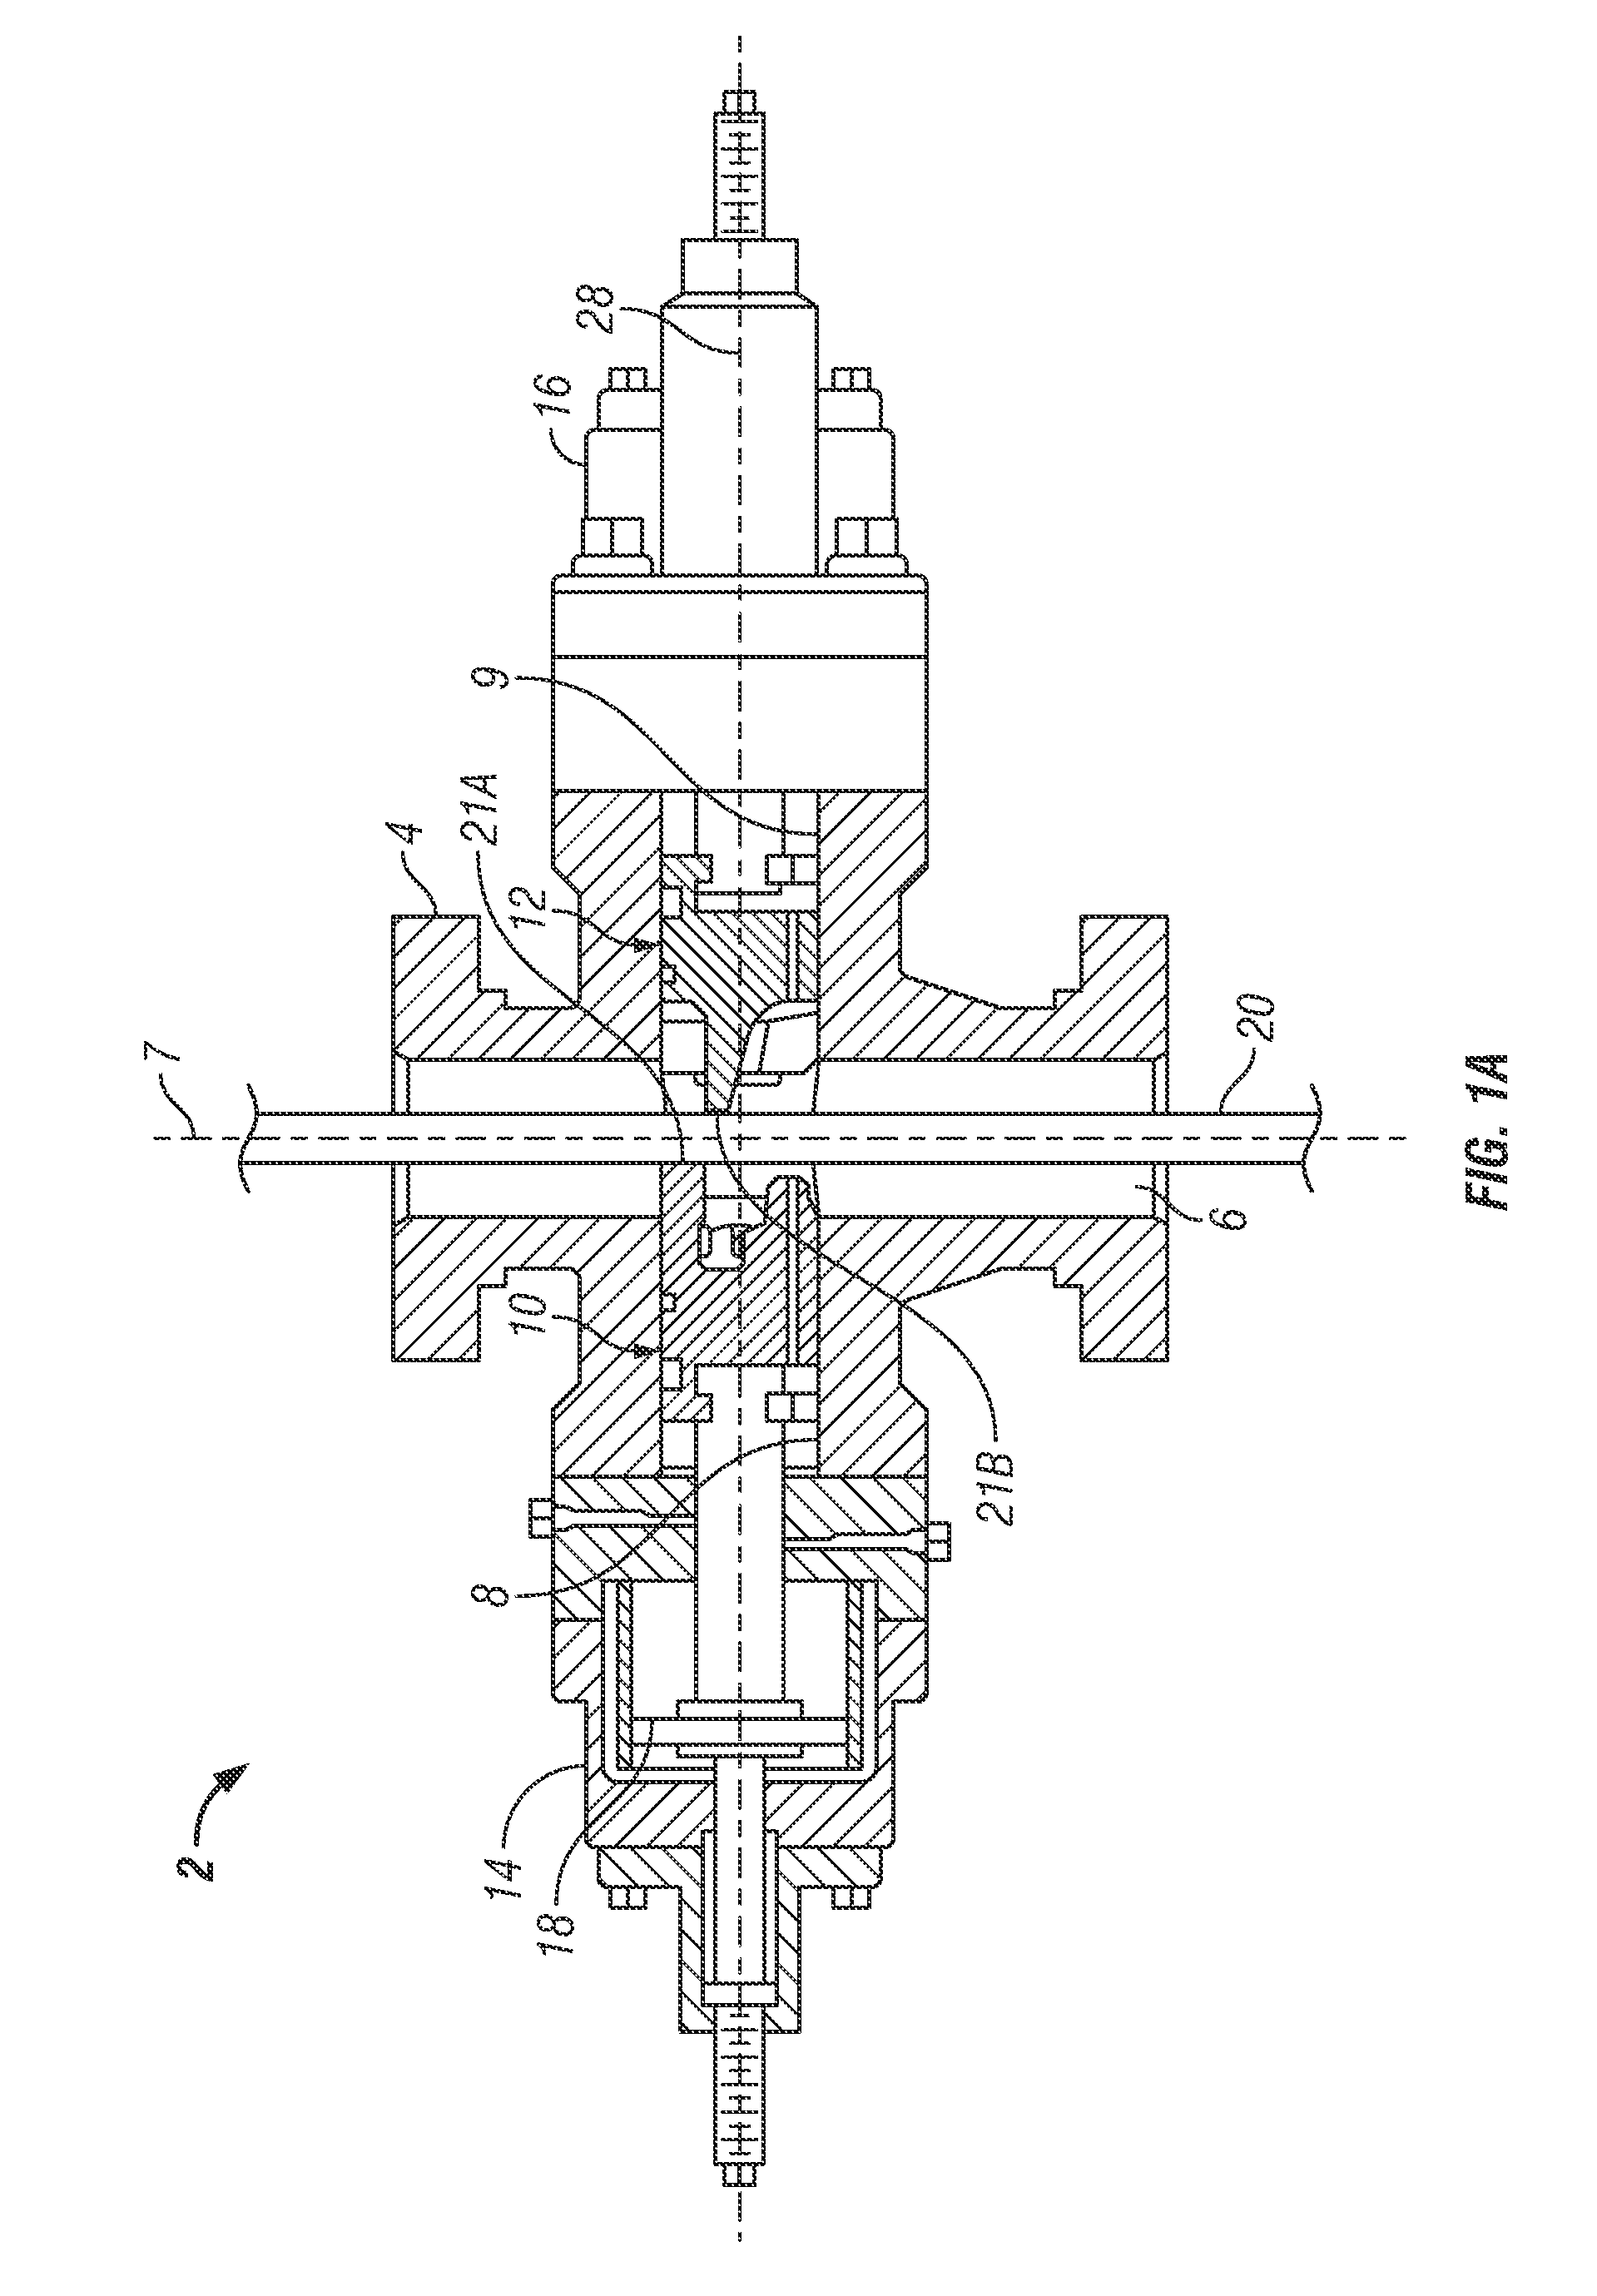 Blowout preventer with shearing blades